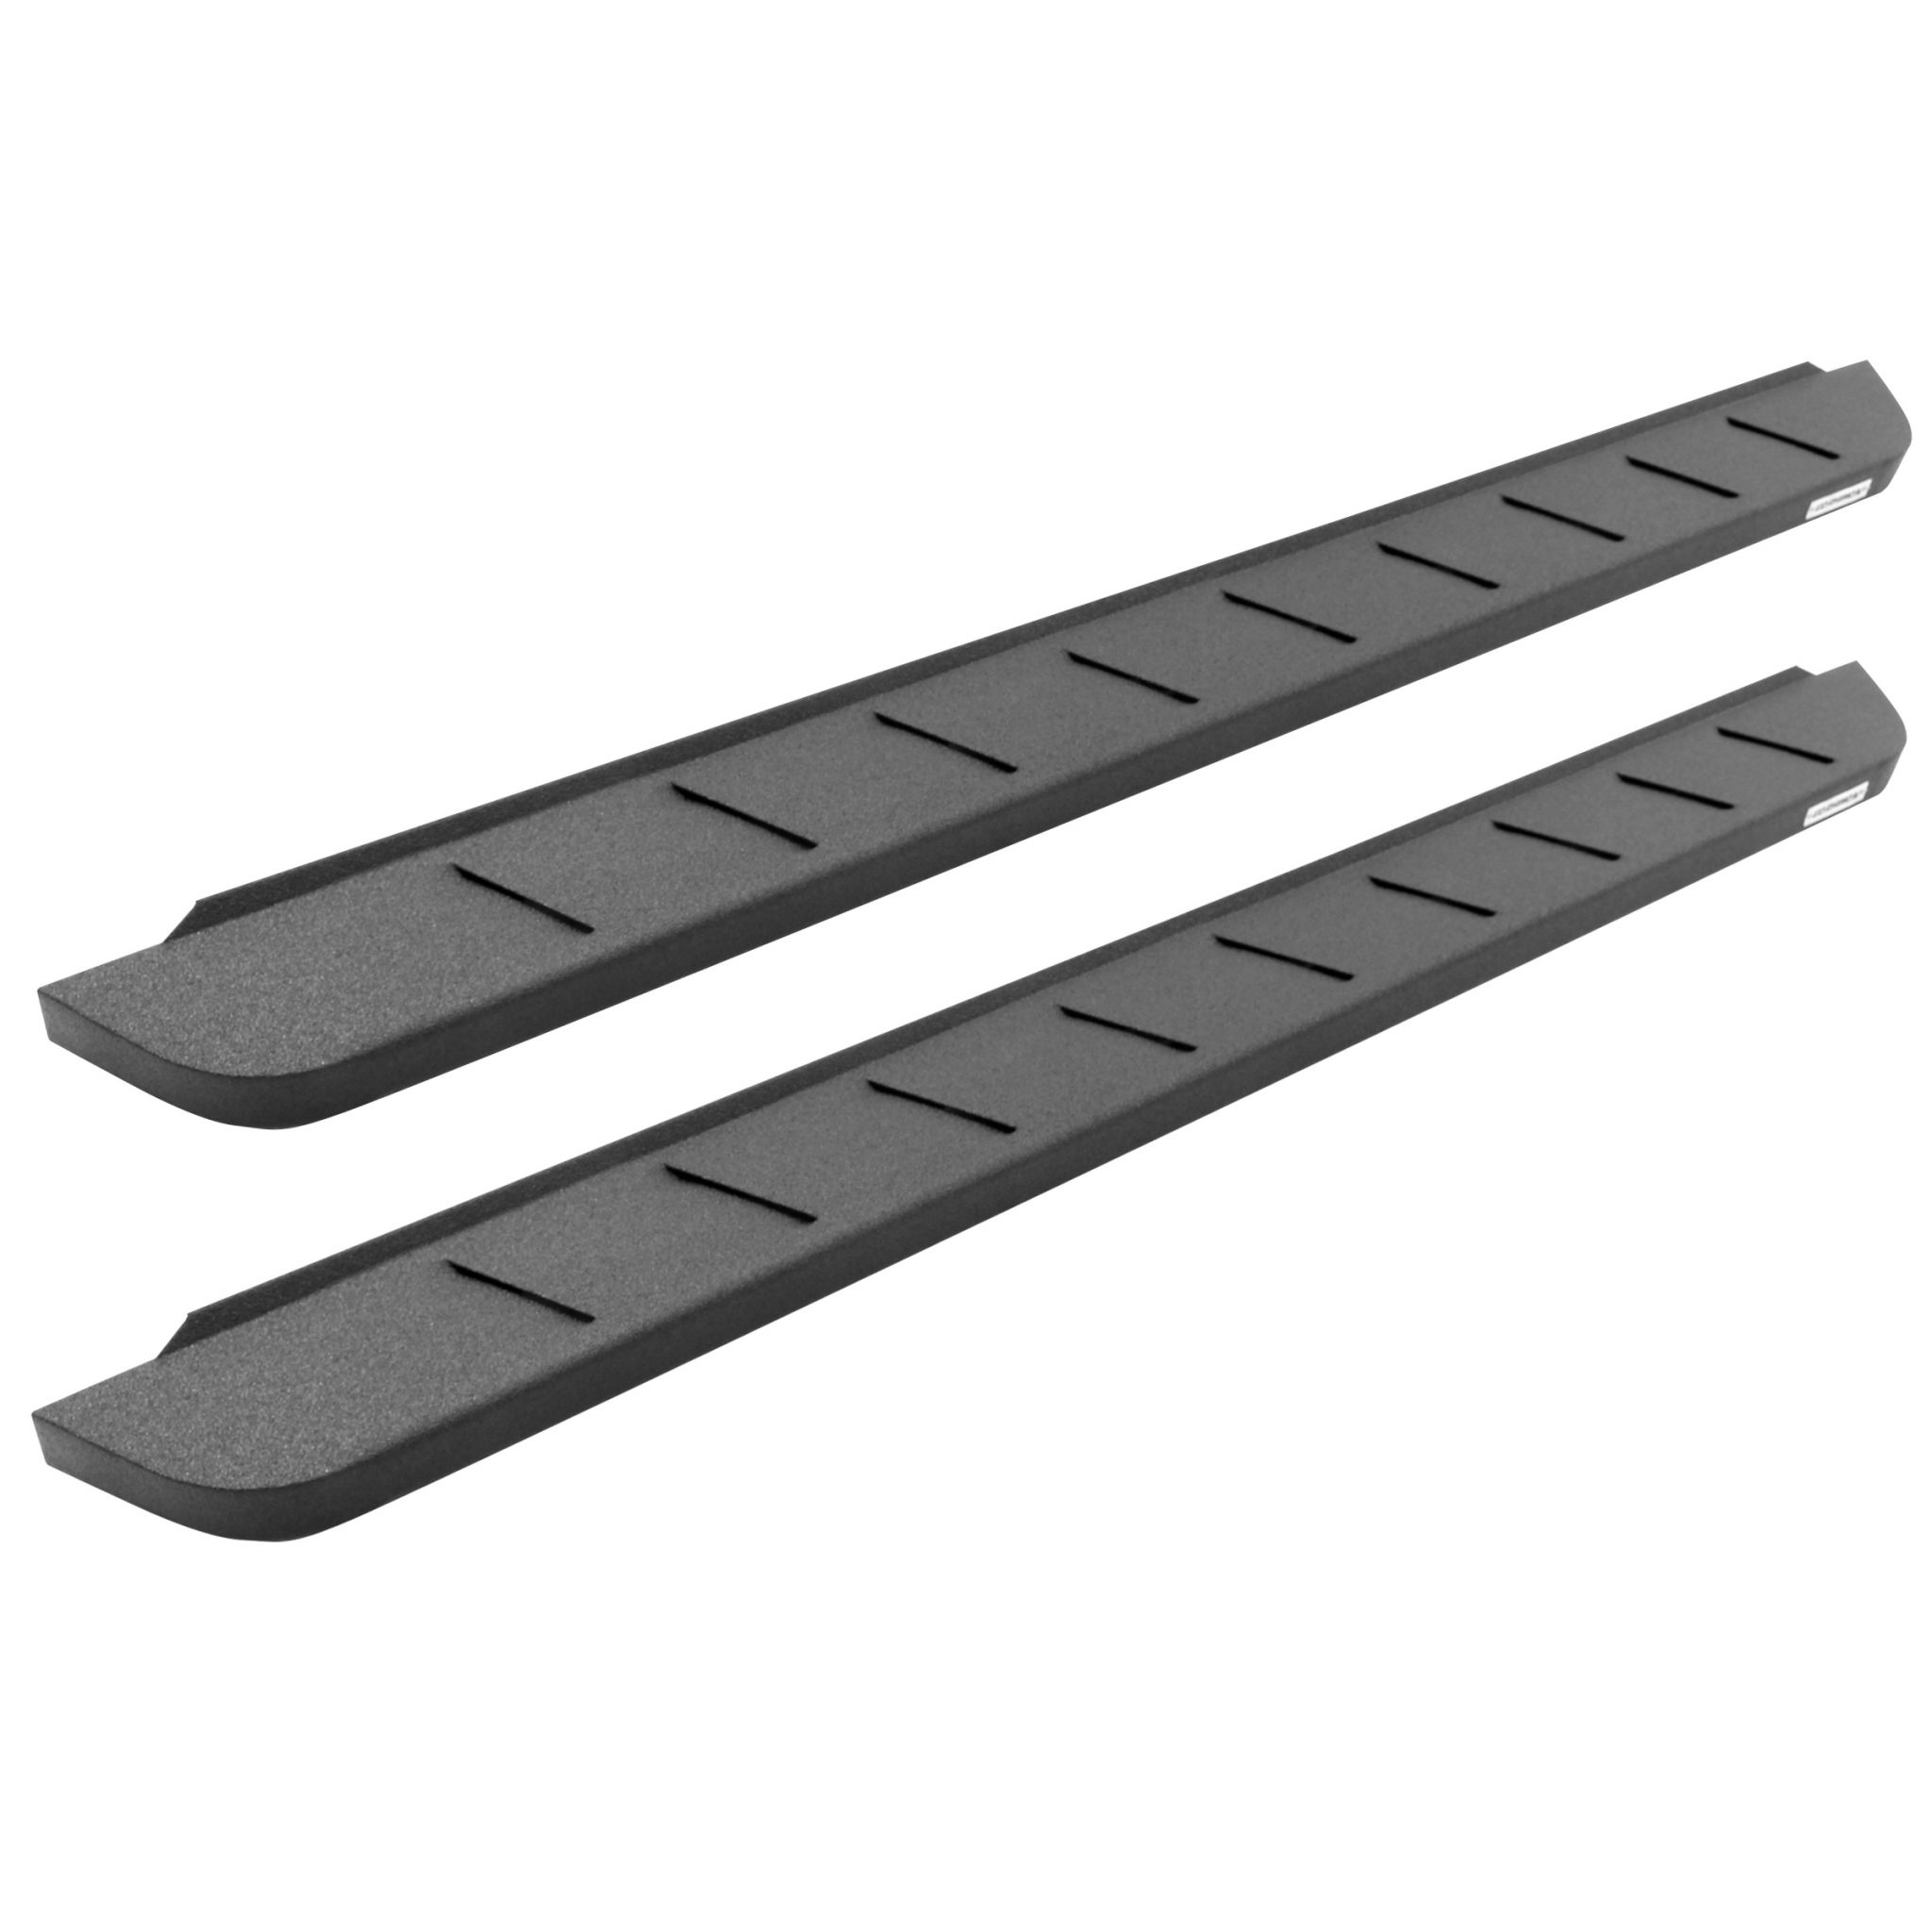 Go Rhino - 63430687T - RB10 Running Boards With Mounting Brackets - Protective Bedliner Coating